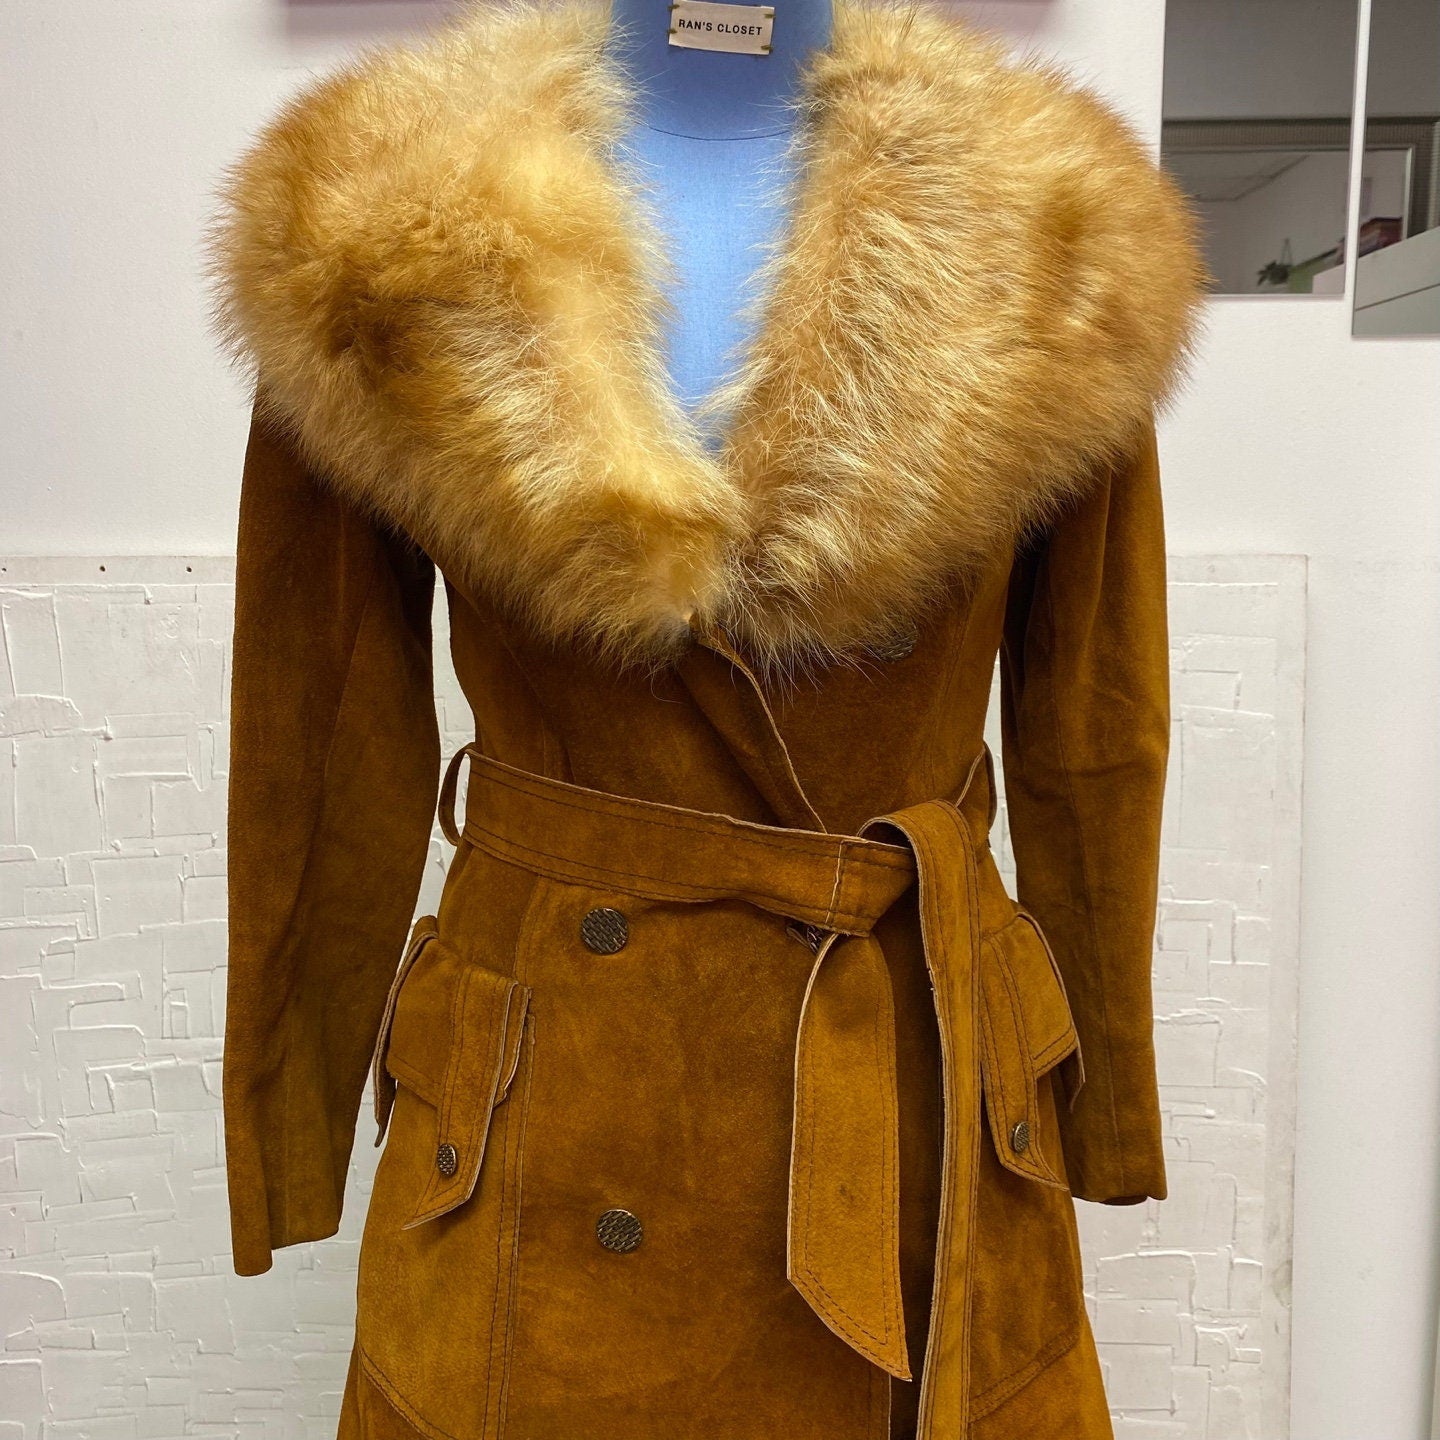 Vintage Leather Fur Lined Penny Lane Coat with Waist Belt | Portofino Fashions | Flap Pockets | Double Breasted | Brown | Size S | M-2002